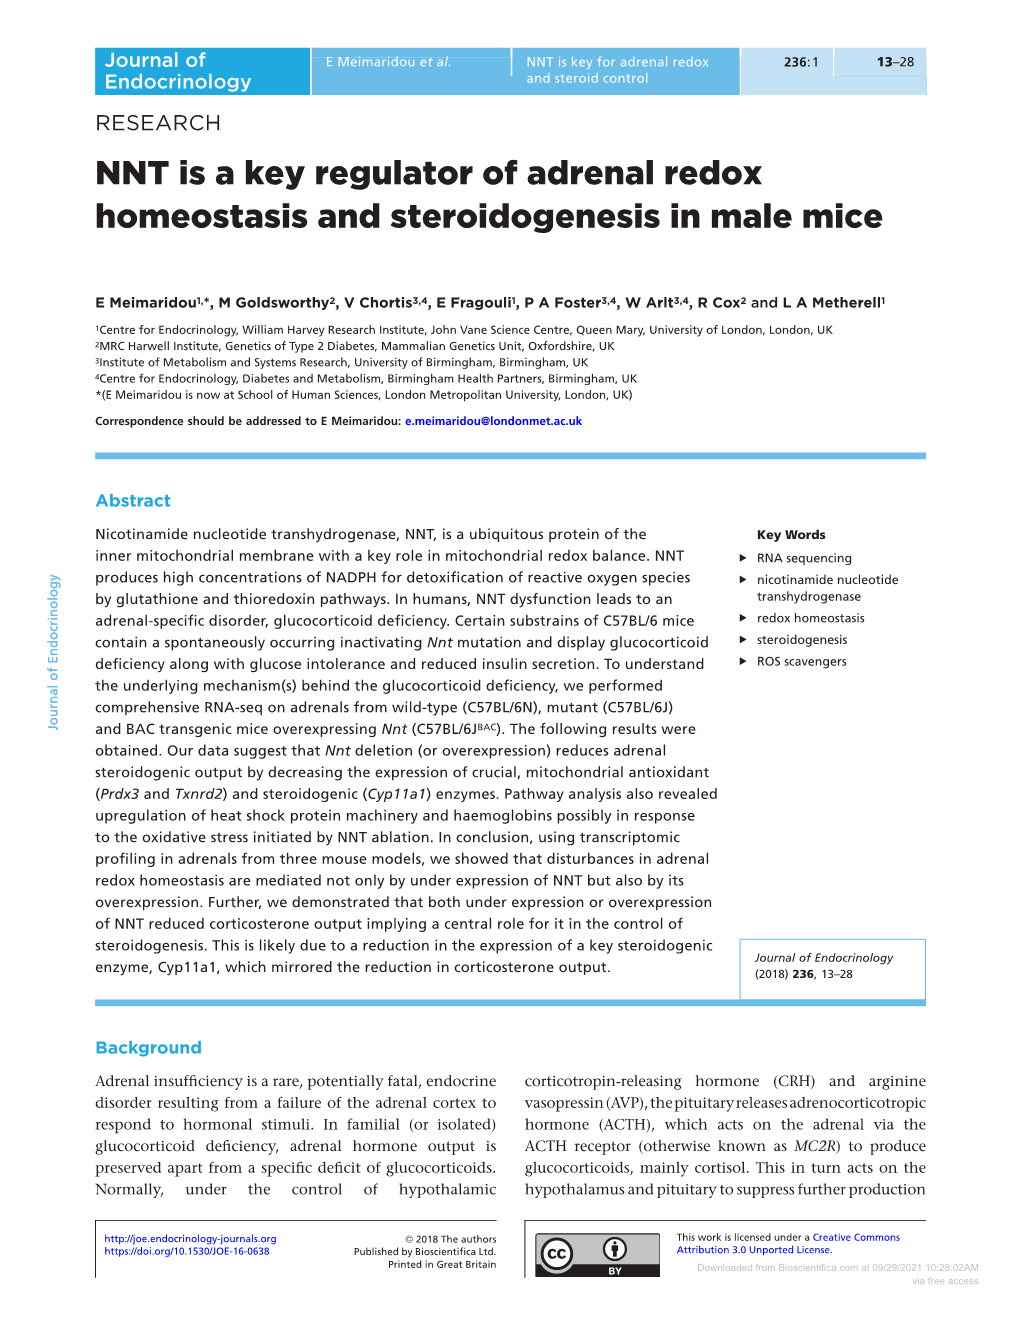 NNT Is a Key Regulator of Adrenal Redox Homeostasis and Steroidogenesis in Male Mice